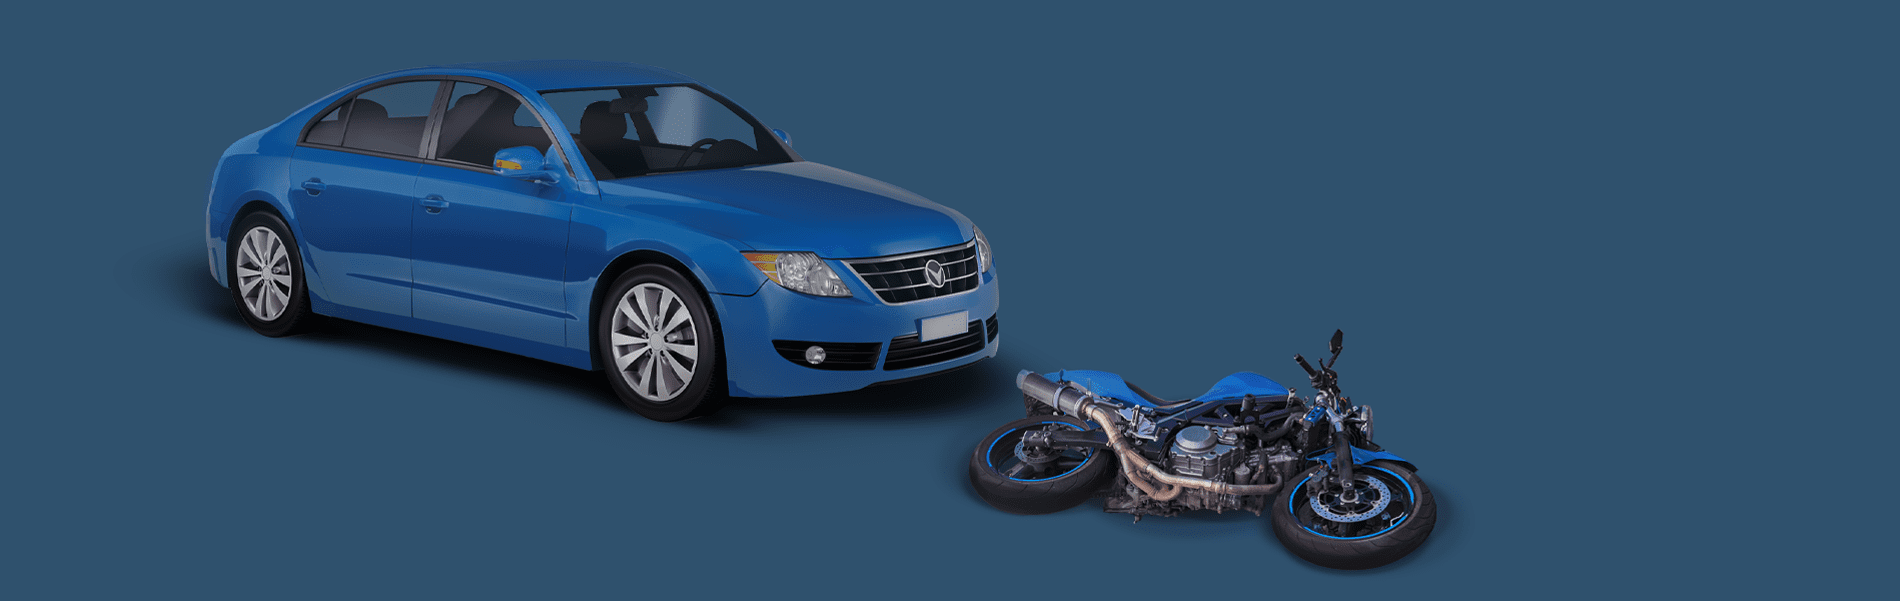 Downed motorcycle in front of a car on a blue background